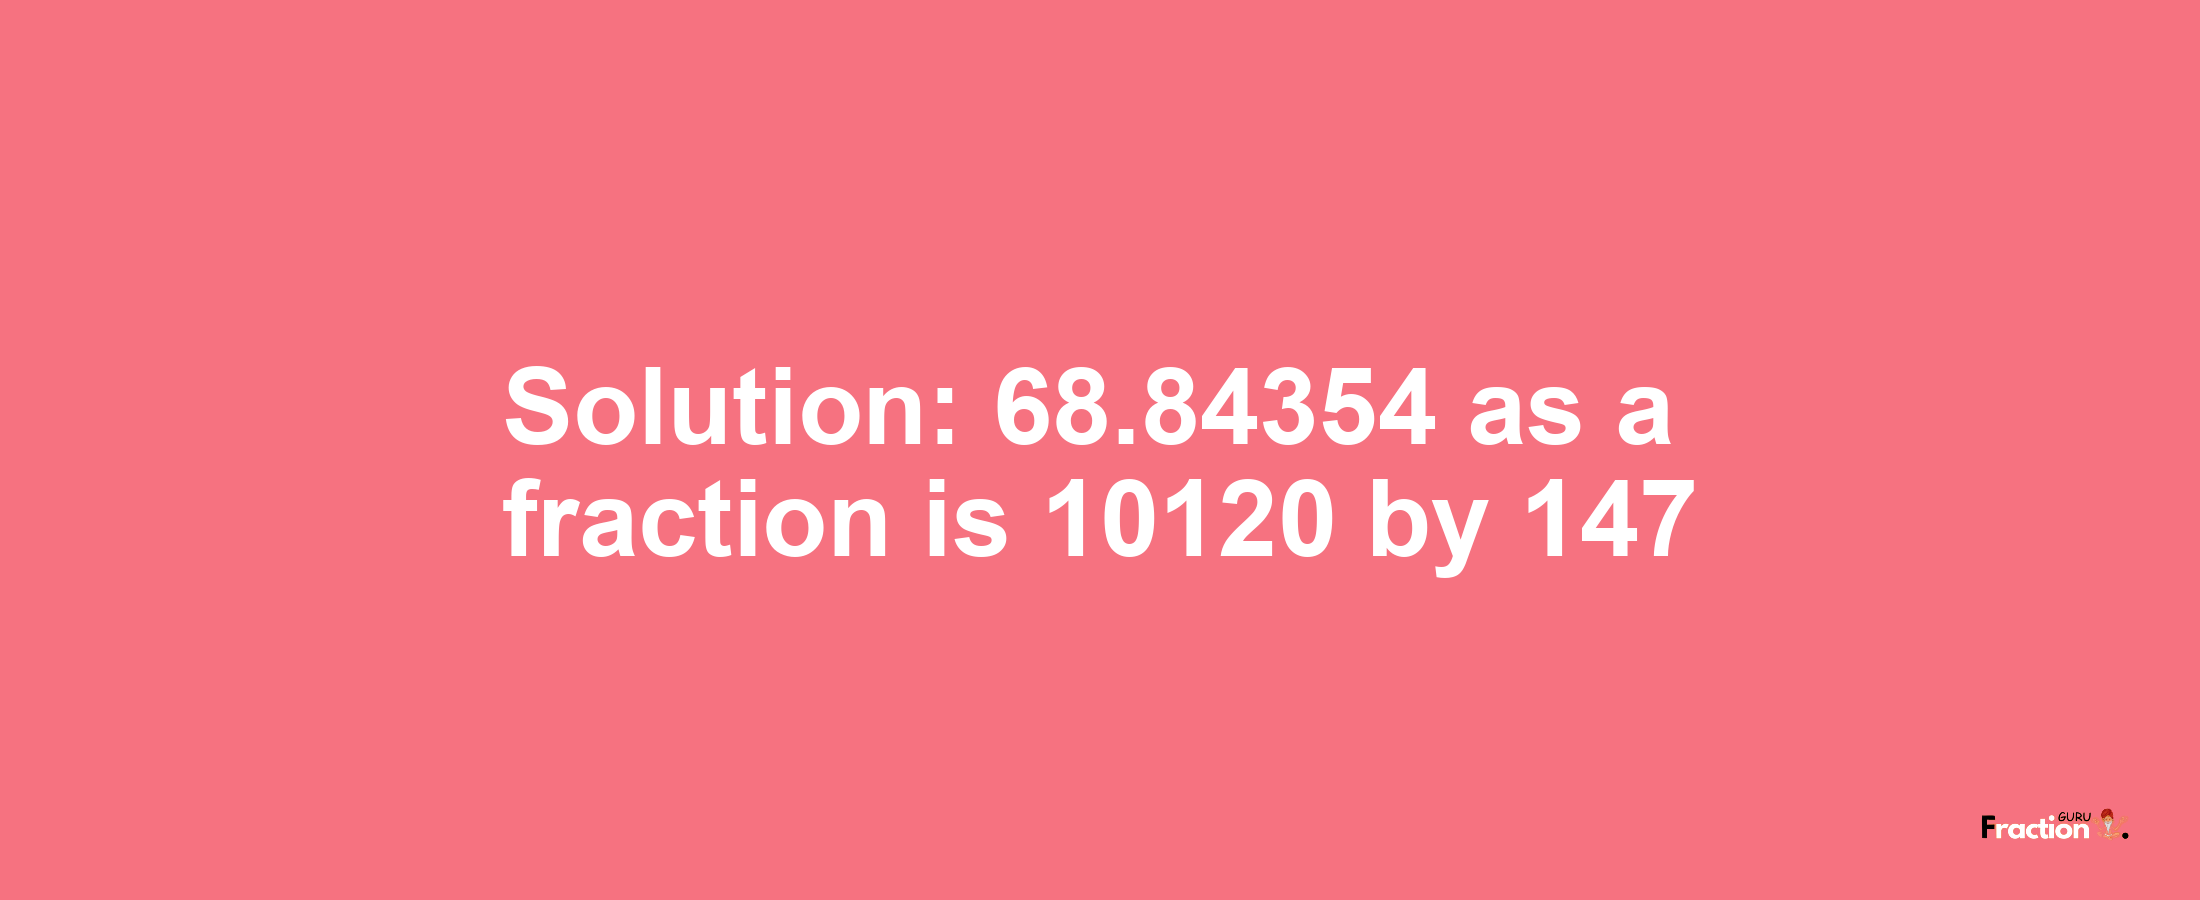 Solution:68.84354 as a fraction is 10120/147